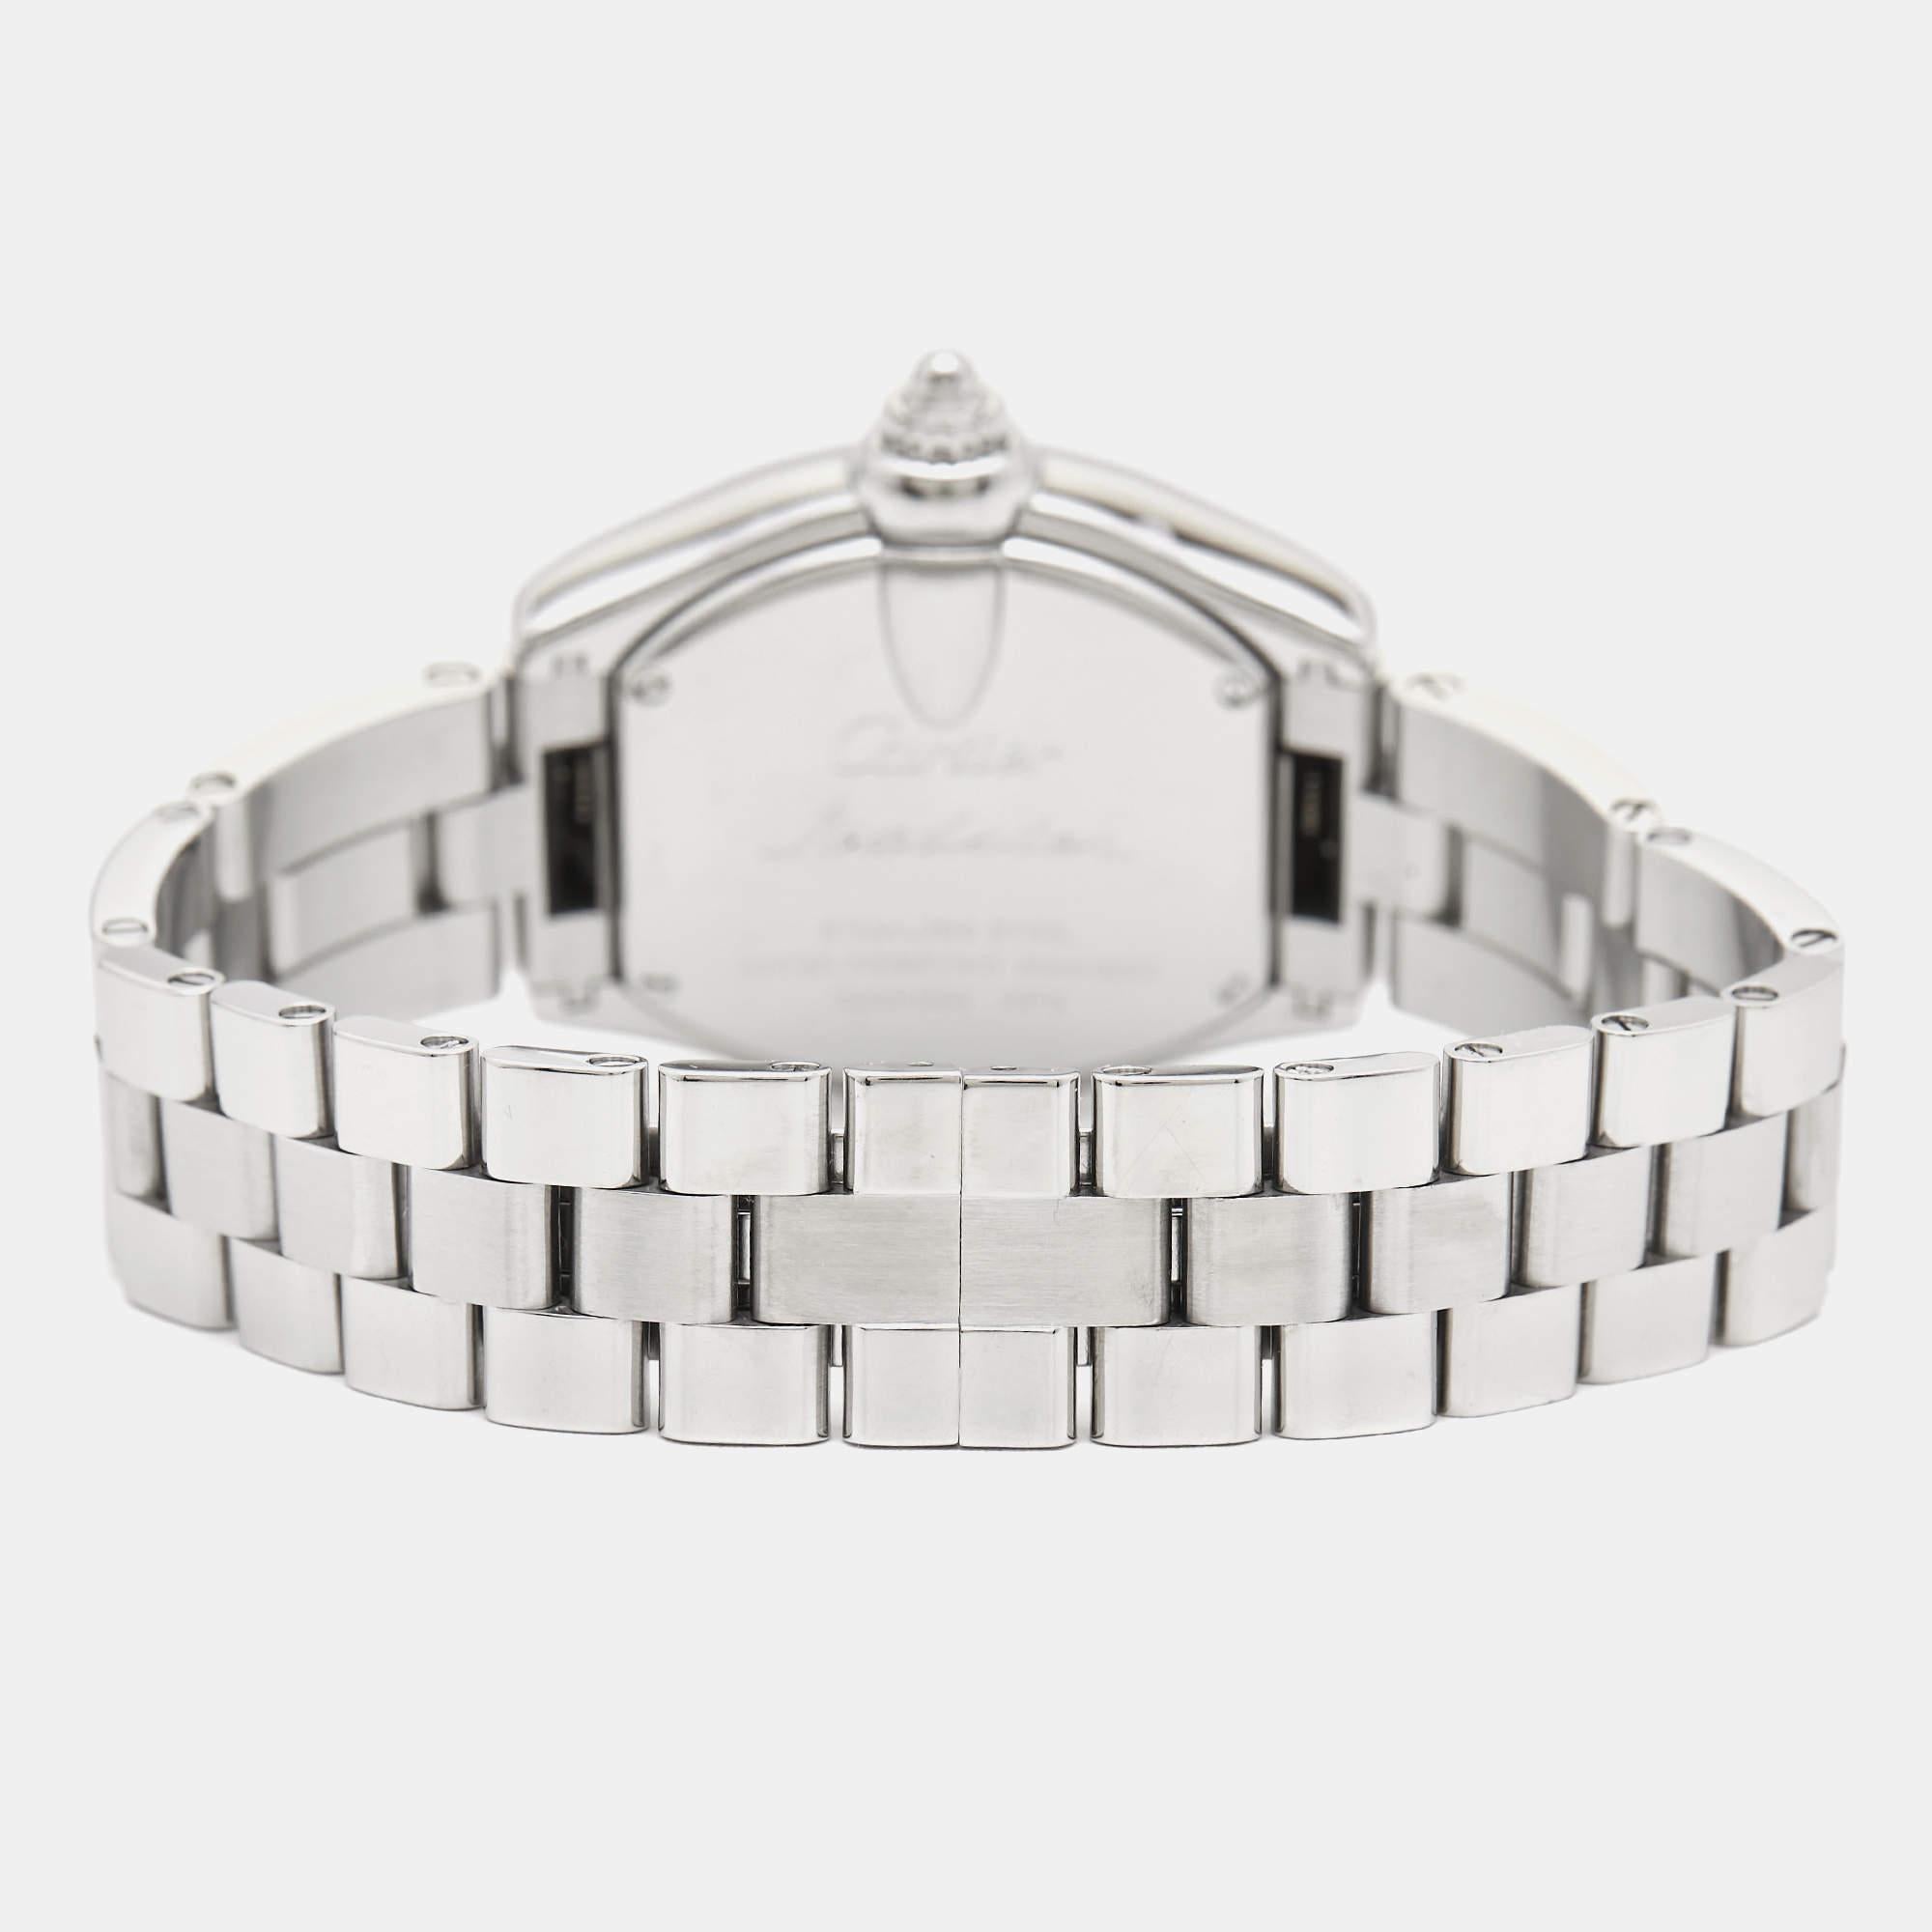 The charm of a finely crafted wristwatch accompanies the wearer through the years and to any occasion they have a date for. It is this charm, infused with timeless luxury, that makes this authentic Cartier Roadster 2675 wristwatch such an incredible